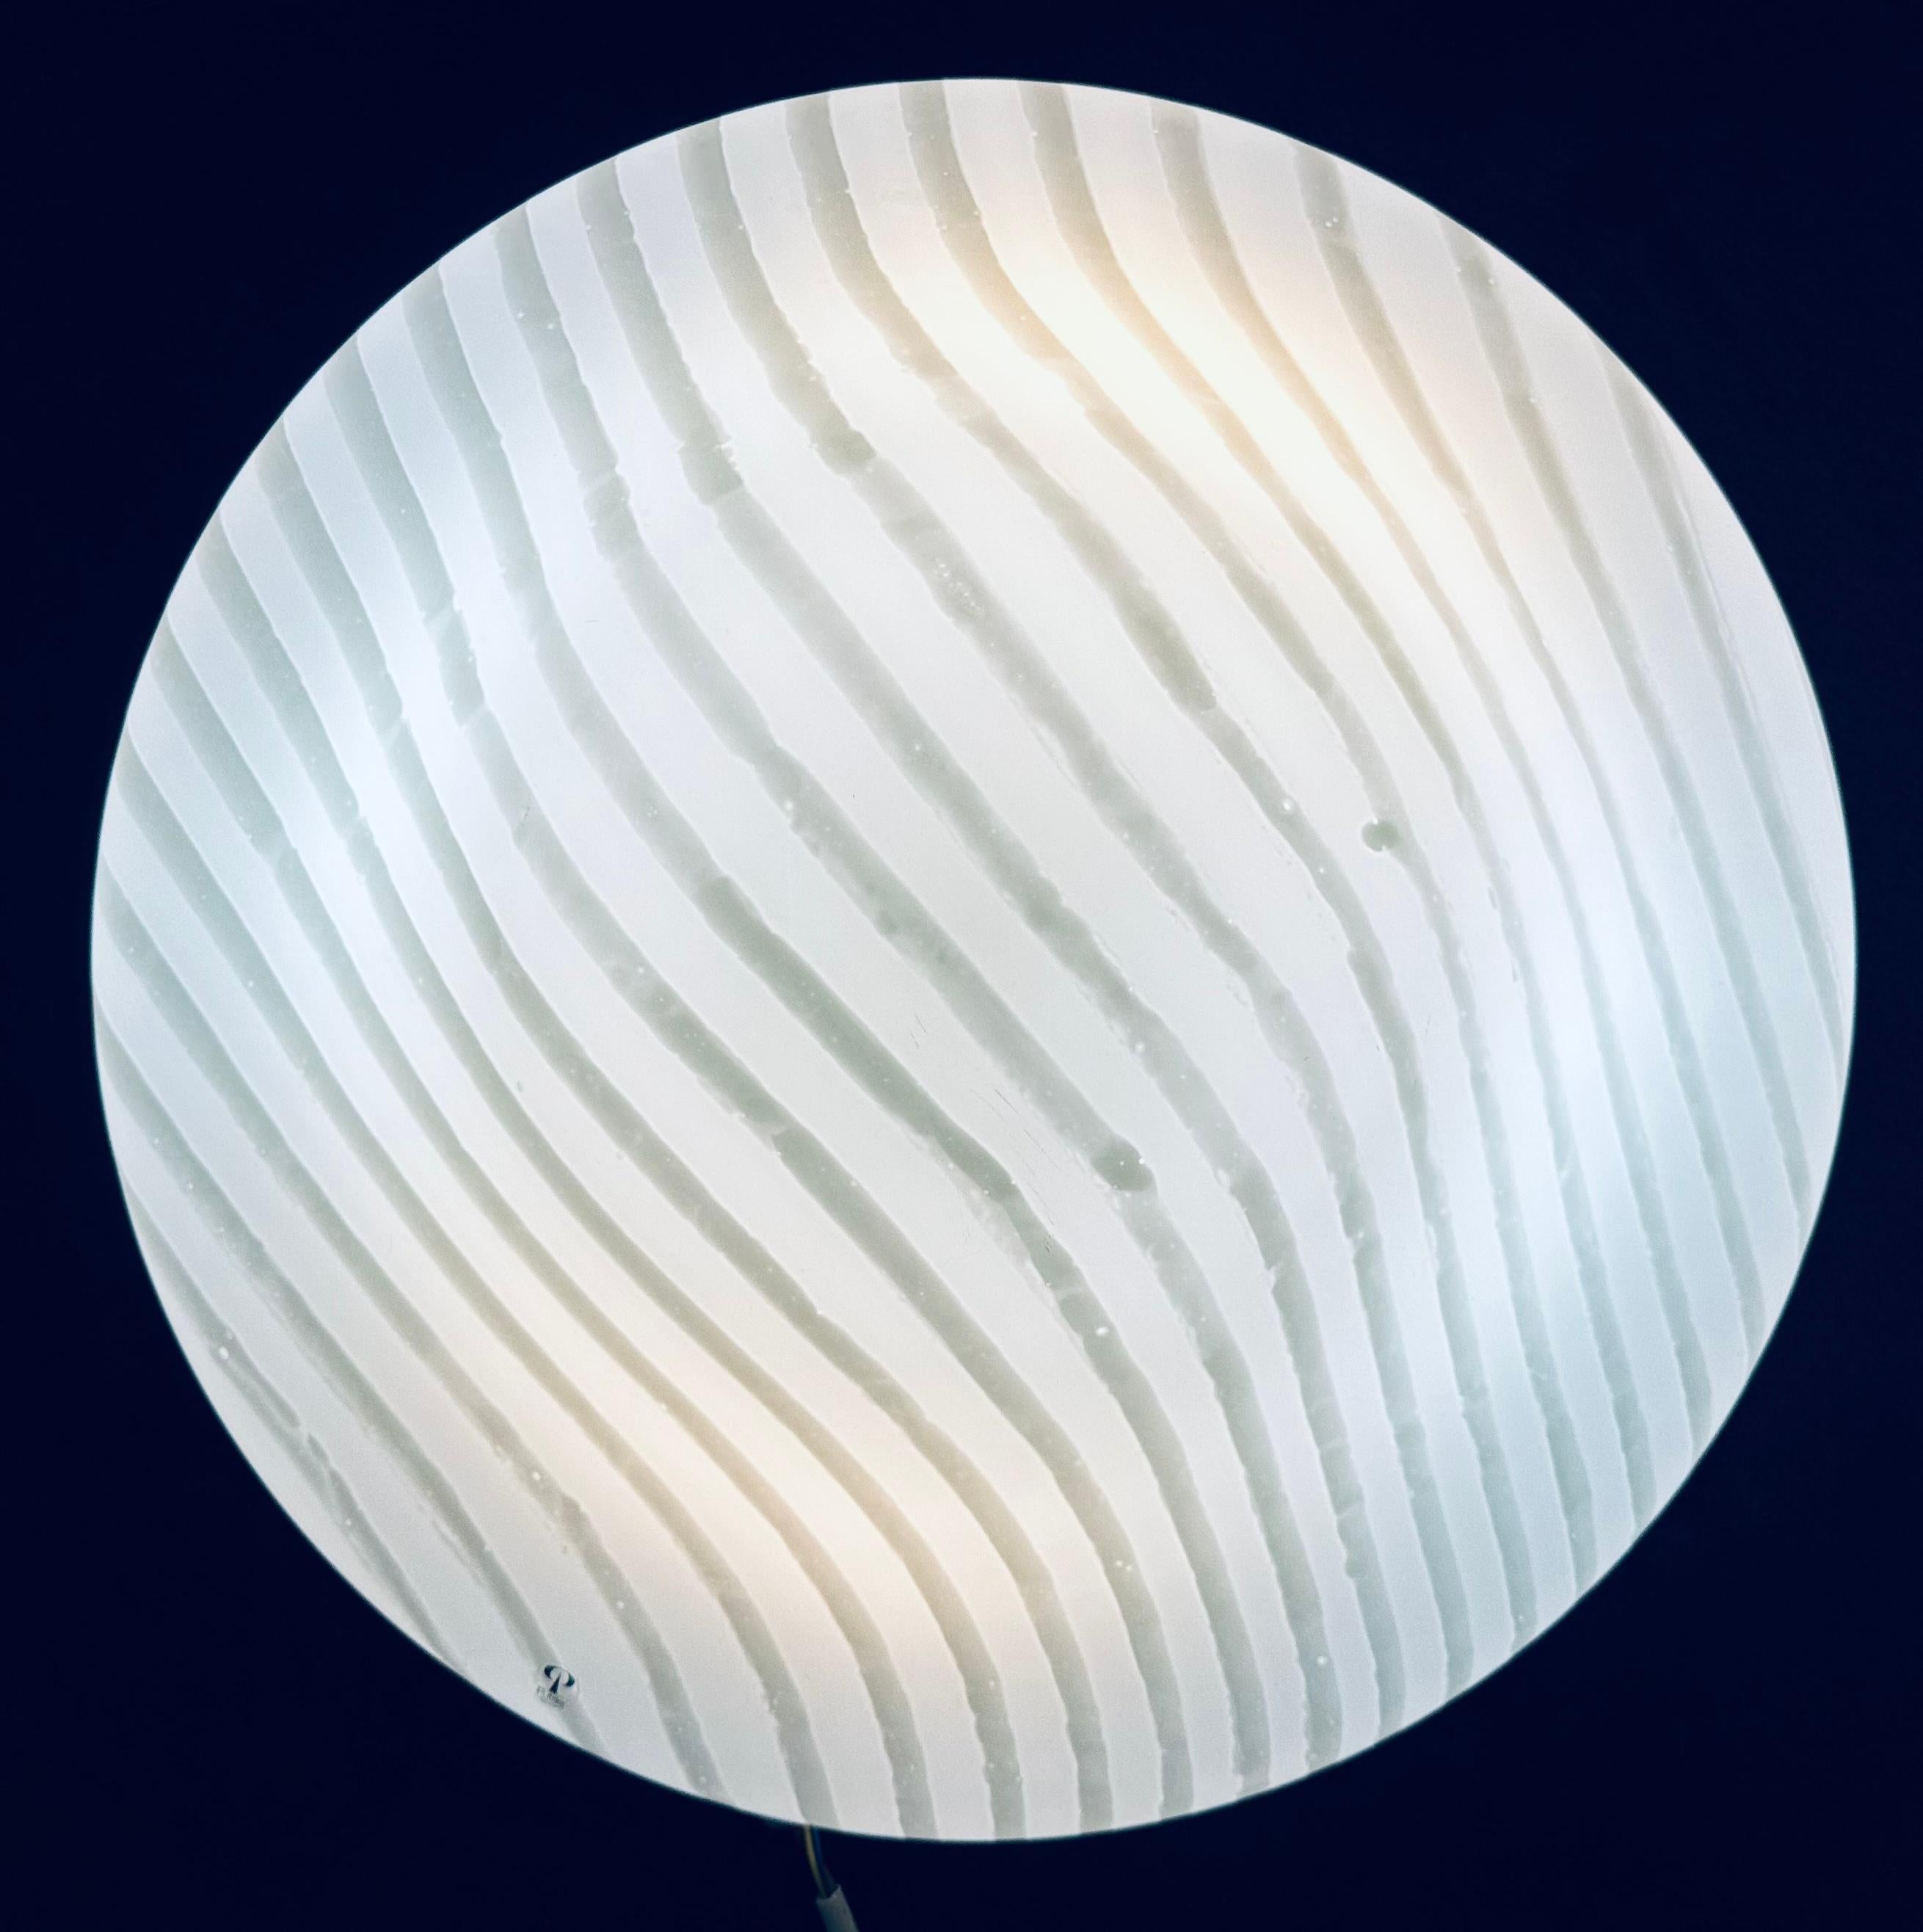 A usually large 1970s German Peill & Putzler plafoniere, space-age, opal glass with a lighter striped pattern flush mount ceiling light.  The opal striped-glass circular shade is fixed onto the white lacquered metal frame/bulb holder with three